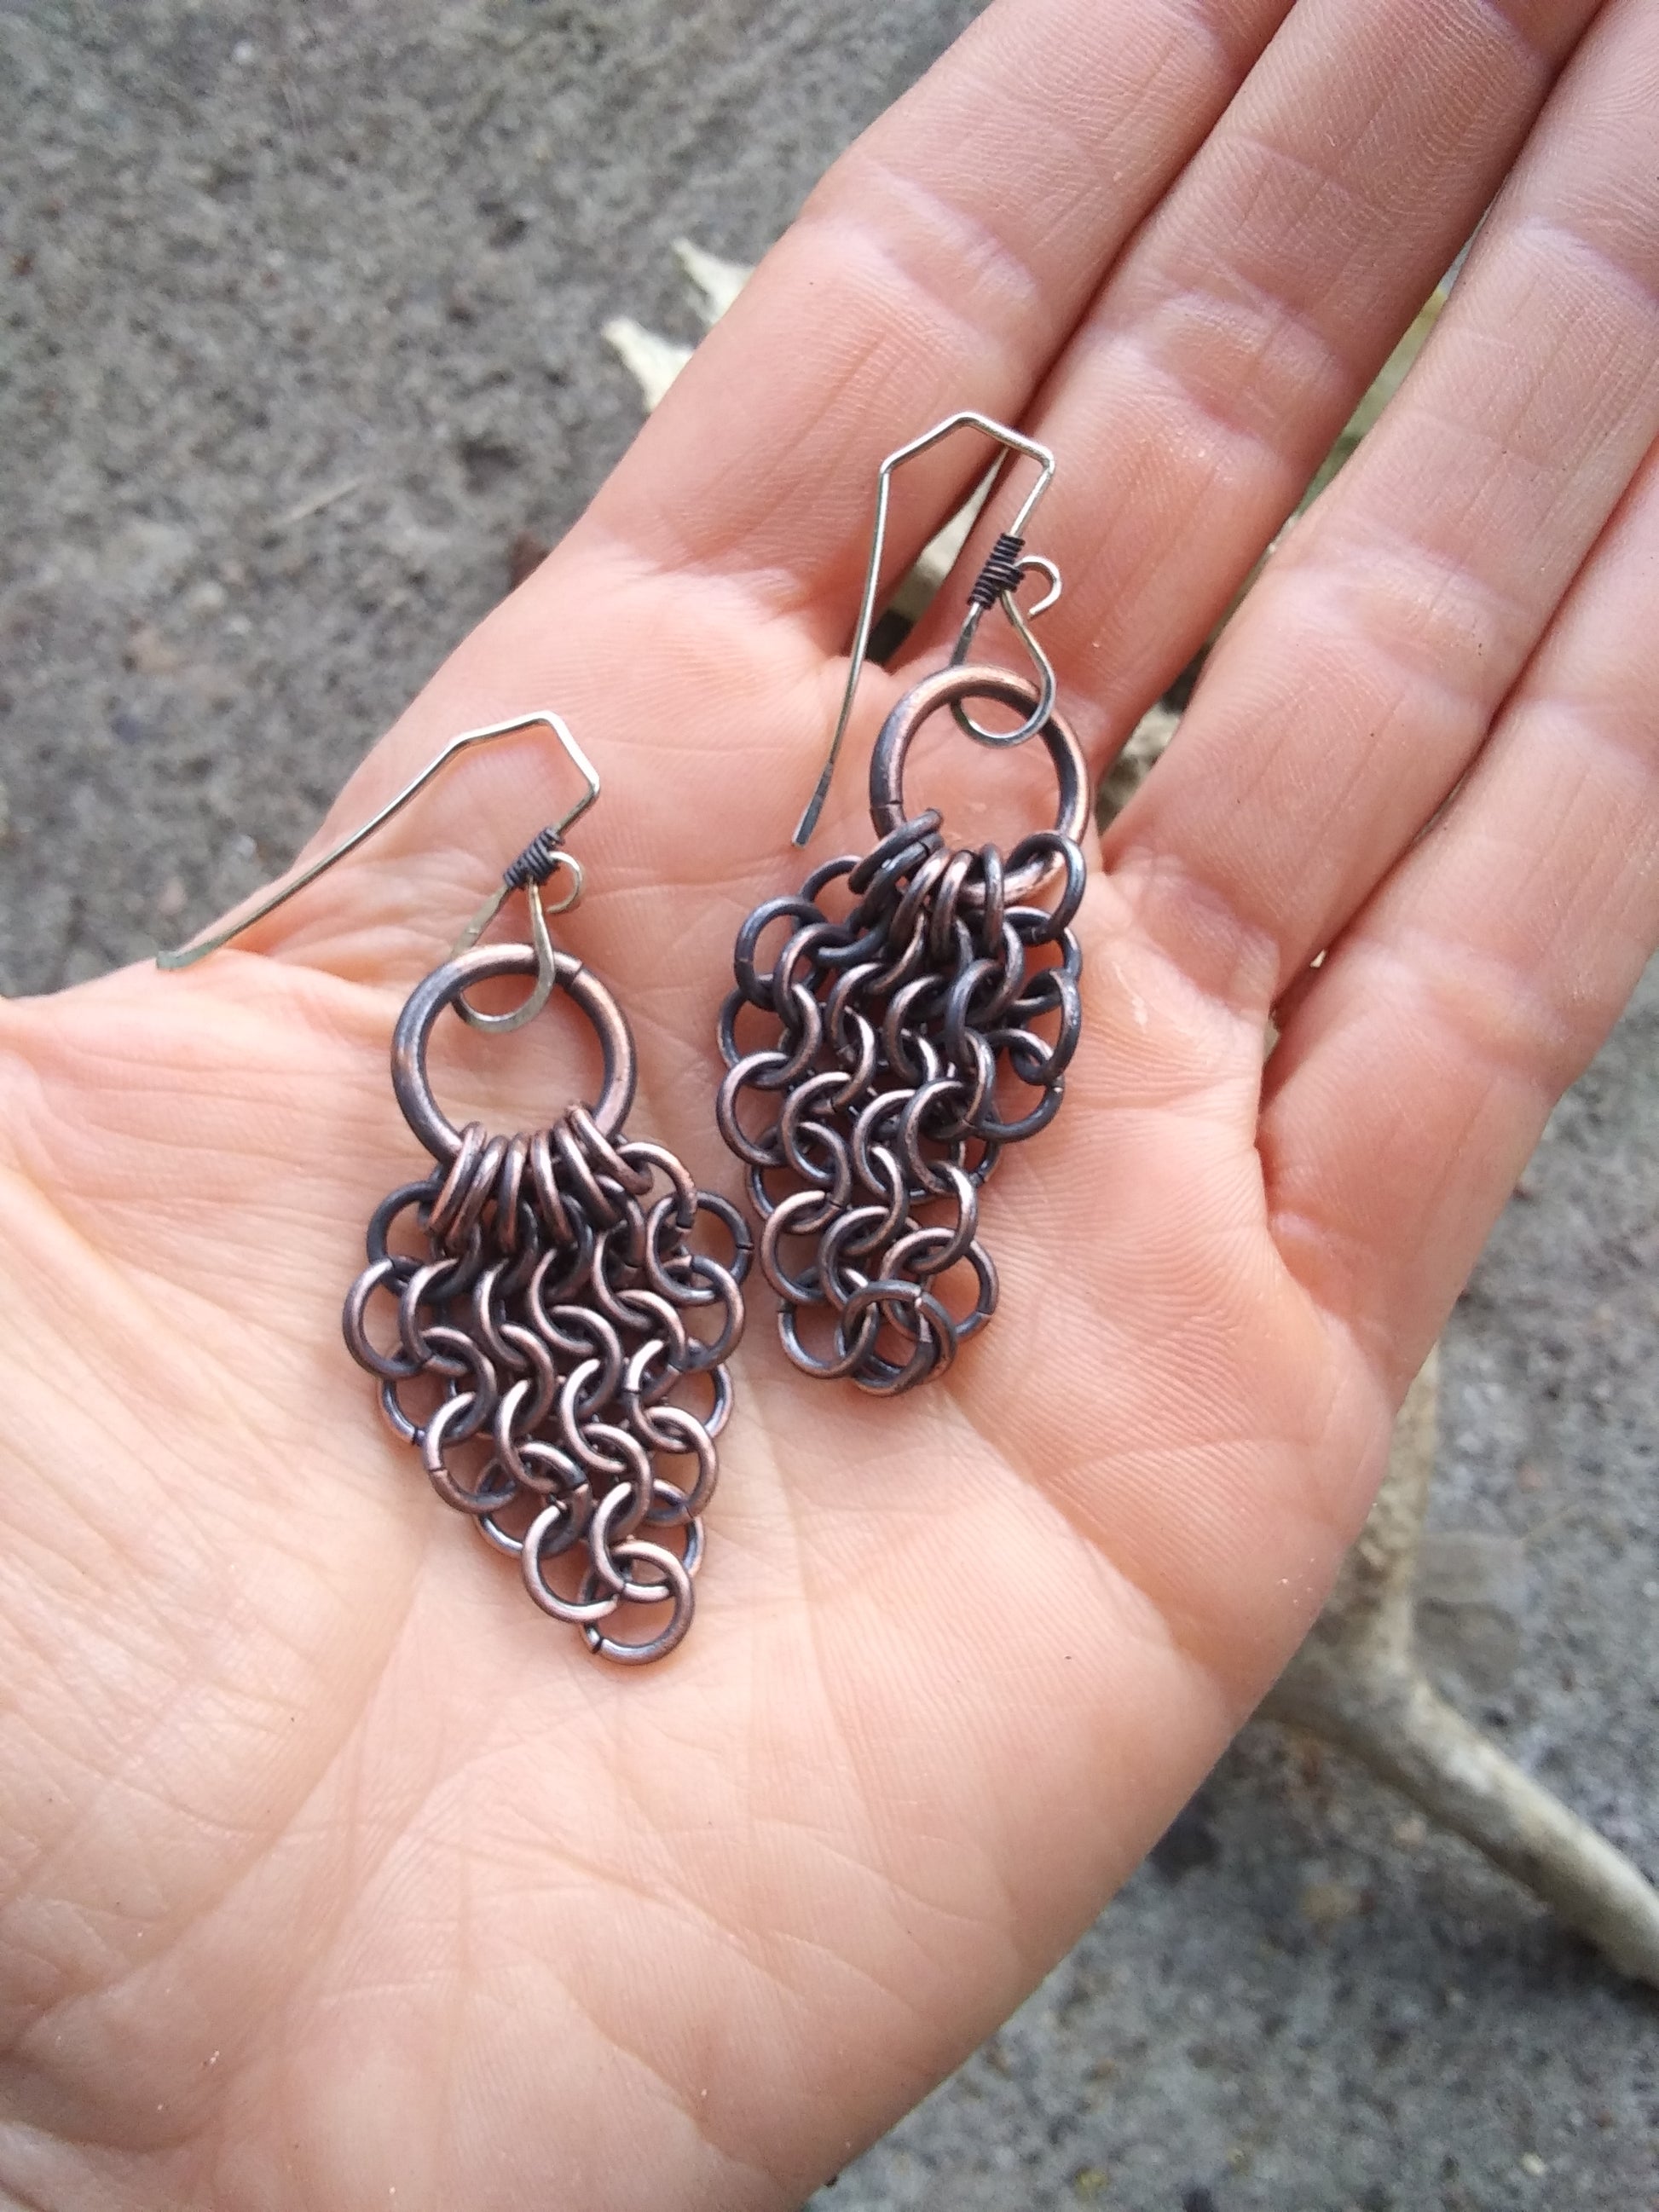 witch store pittsburgh,  small chainmail earrings,  gothic chainmail hoop earrings , elegant chainmail earrings,  elegant chainmail,  distressed jewelry,  distressed earrings,  distressed copper jewelry,  distressed copper earrings, goth girl earrings,  distressed copper,  dark copper jewelry,  dark copper earrings,  copper hoops,  copper earrings hoops,  copper earrings,  copper chainmail dangles,  copper chainmail,  copper chain link earrings,  copper bib chainmail hoop earrings,  artisan copper earrings